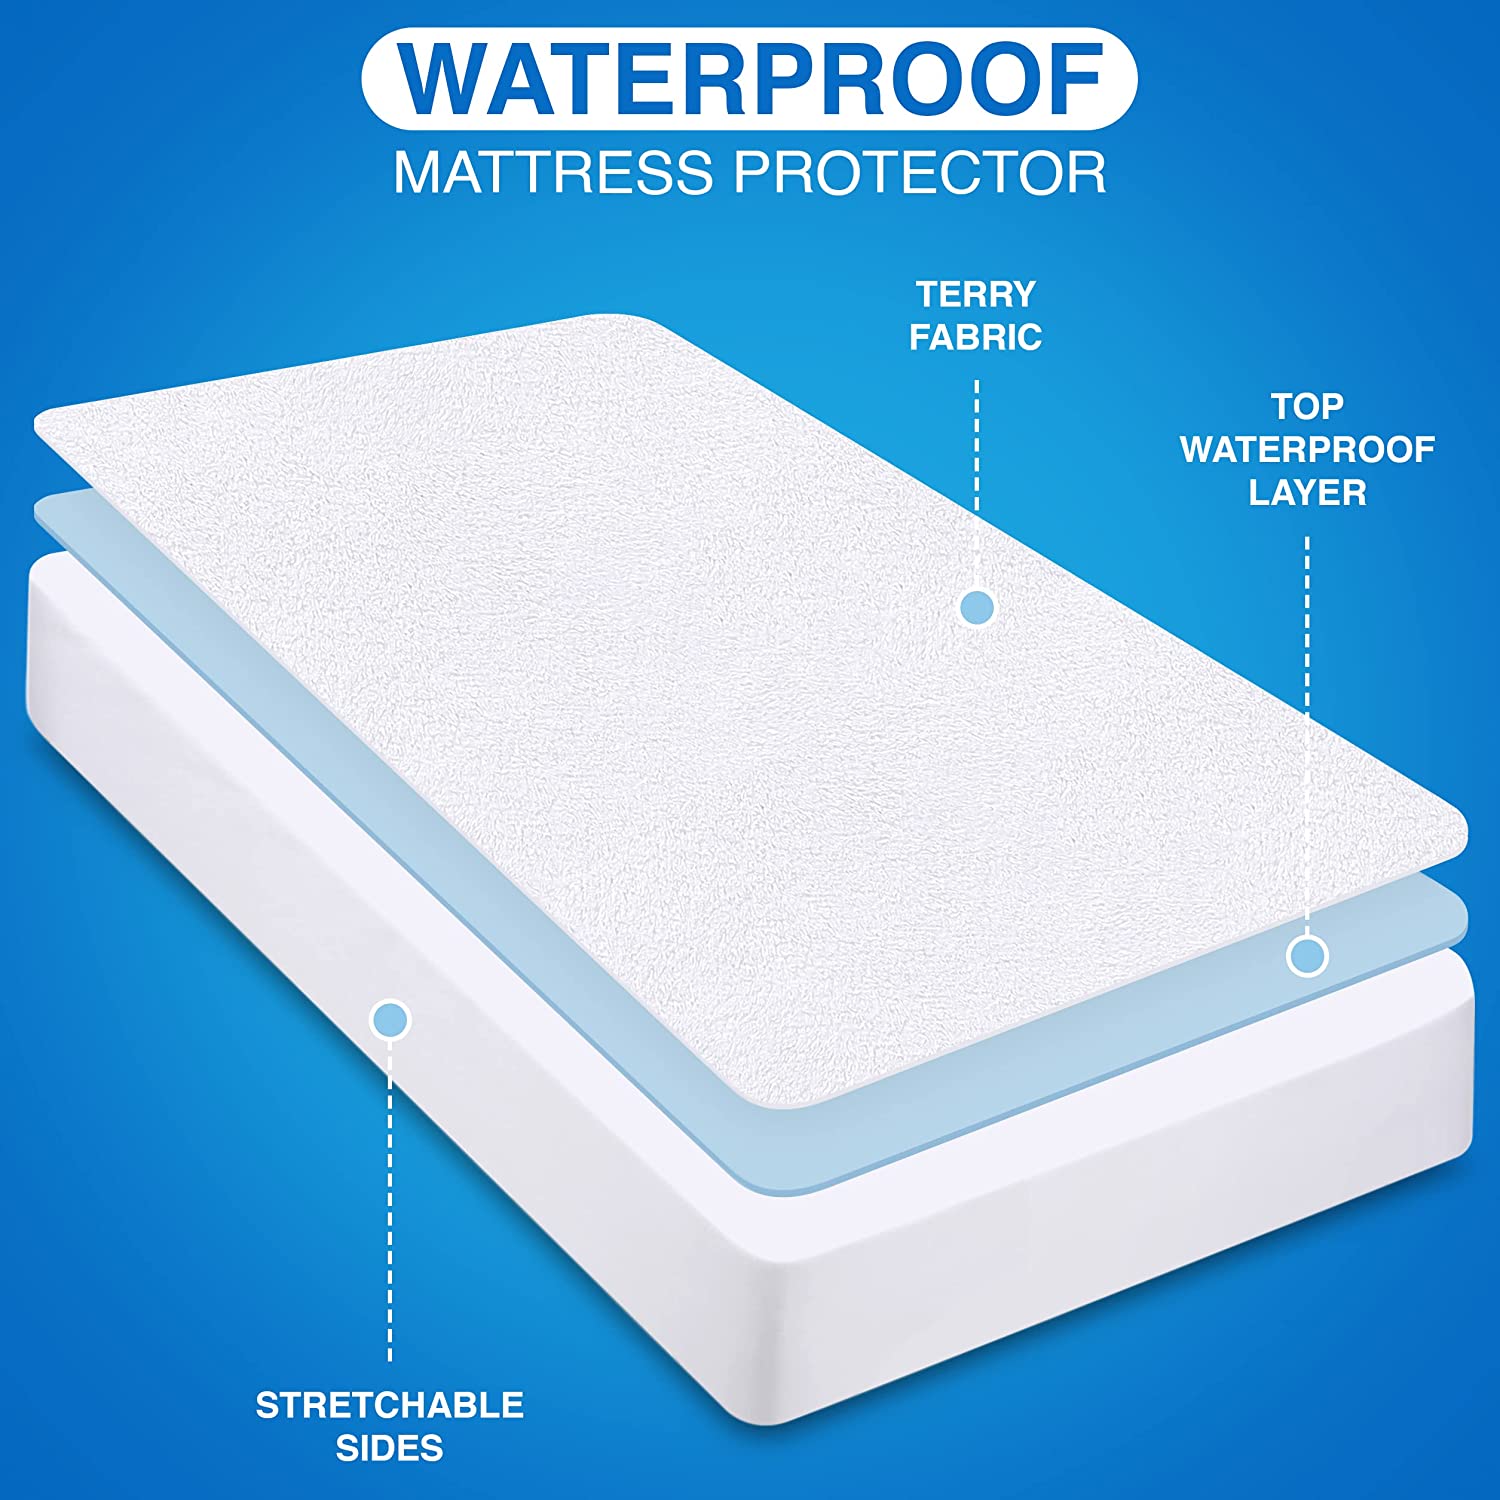  Utopia Bedding Premium Waterproof White Terry Mattress  Protector with All Season Box Stitched Comforter - Pack of 2 (Queen, White)  – Plush Siliconized Fiberfill Duvet Insert : Home & Kitchen